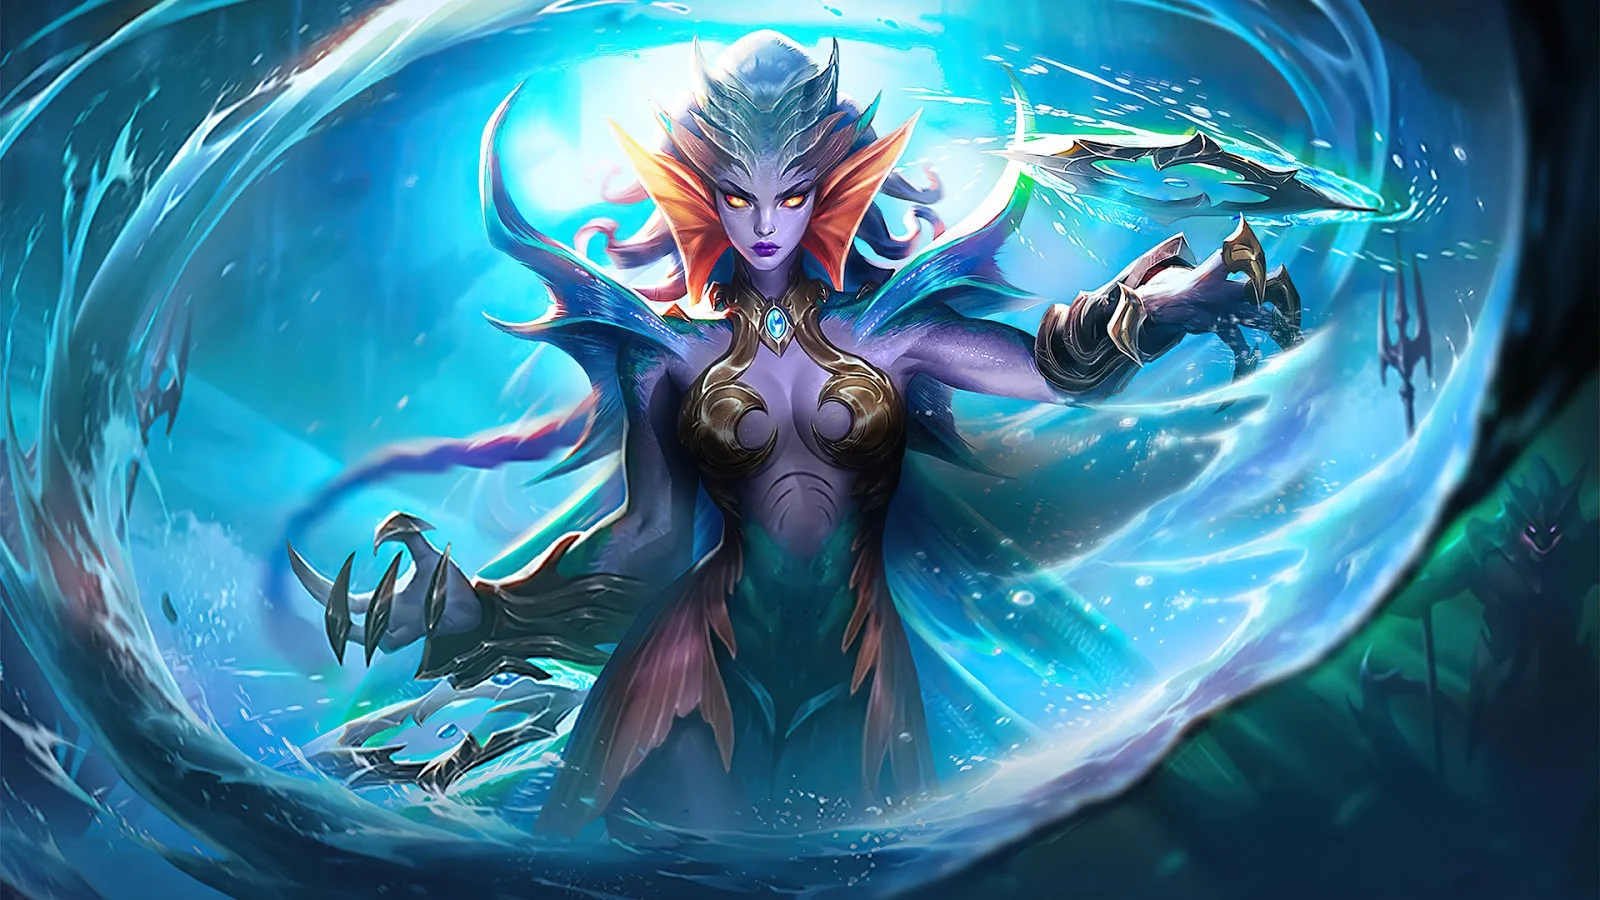 Image#70 15+ Wallpaper Karrie Mobile Legends (ML) Full HD for PC, Android & iOS